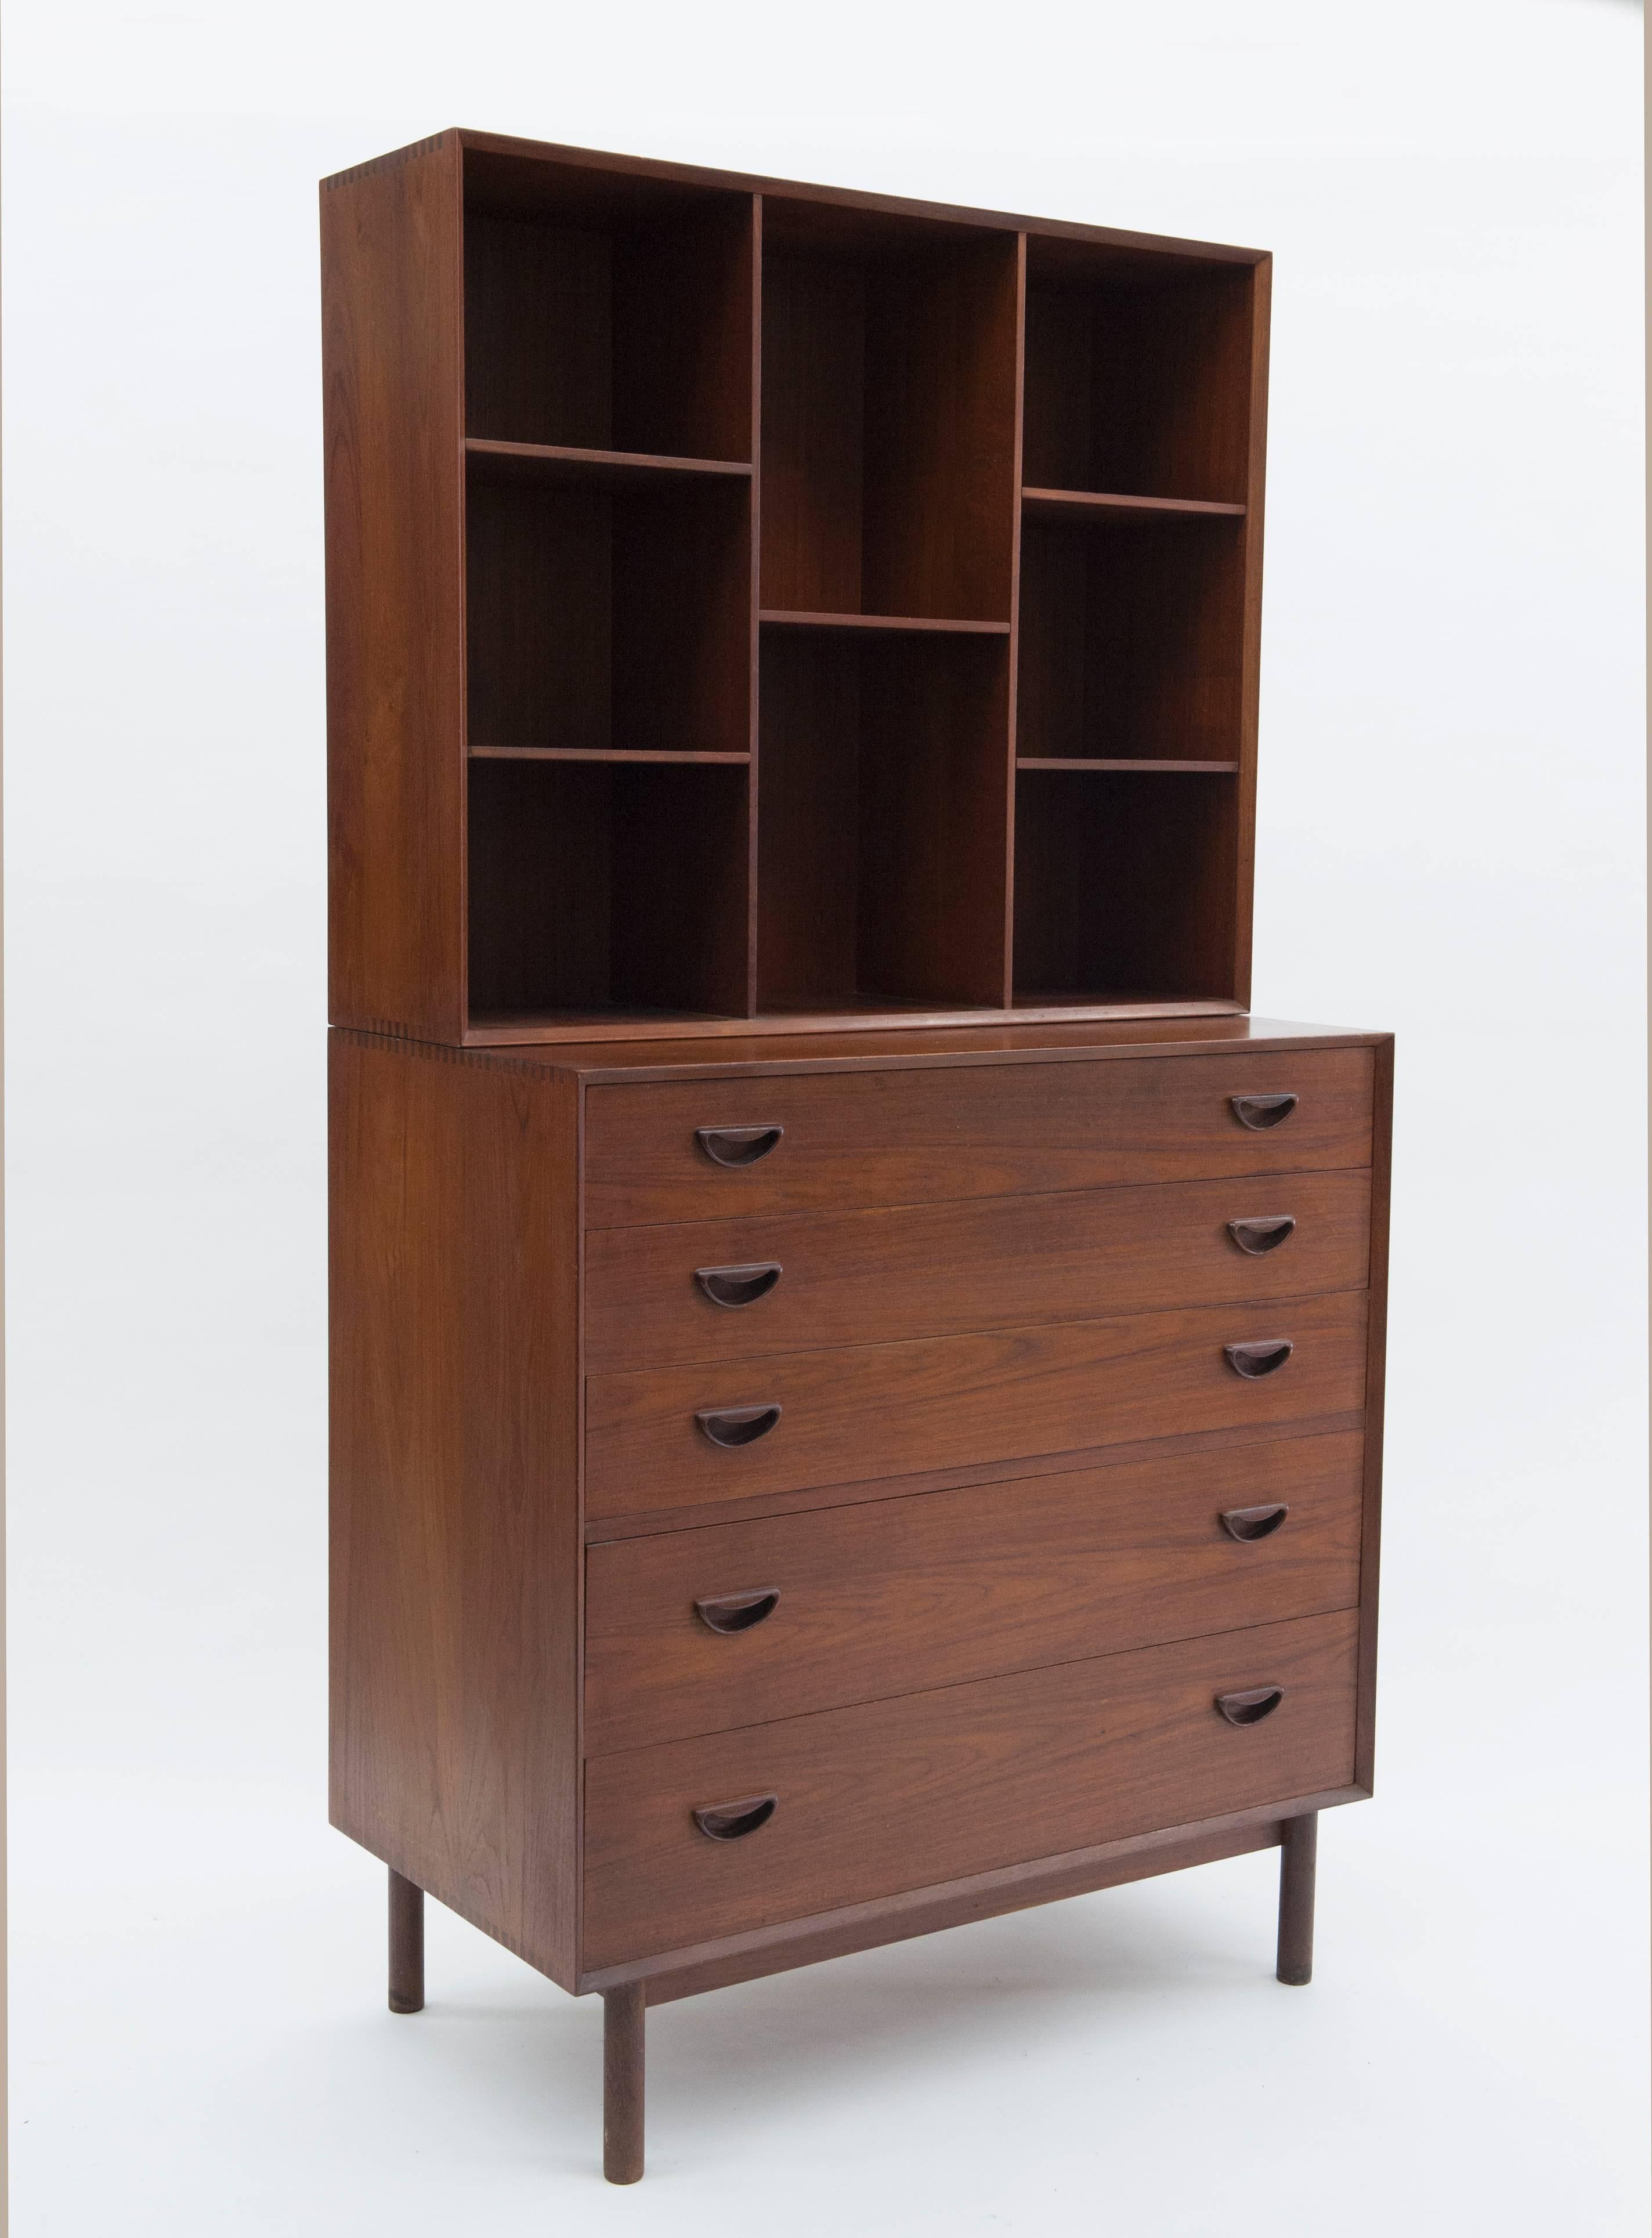 Solid teak chest of drawers and bookcase by Peter Hvidt and Orla Molgaard-Nielsen, Denmark. Cabinet maker quality construction. Highly functional piece in excellent condition.